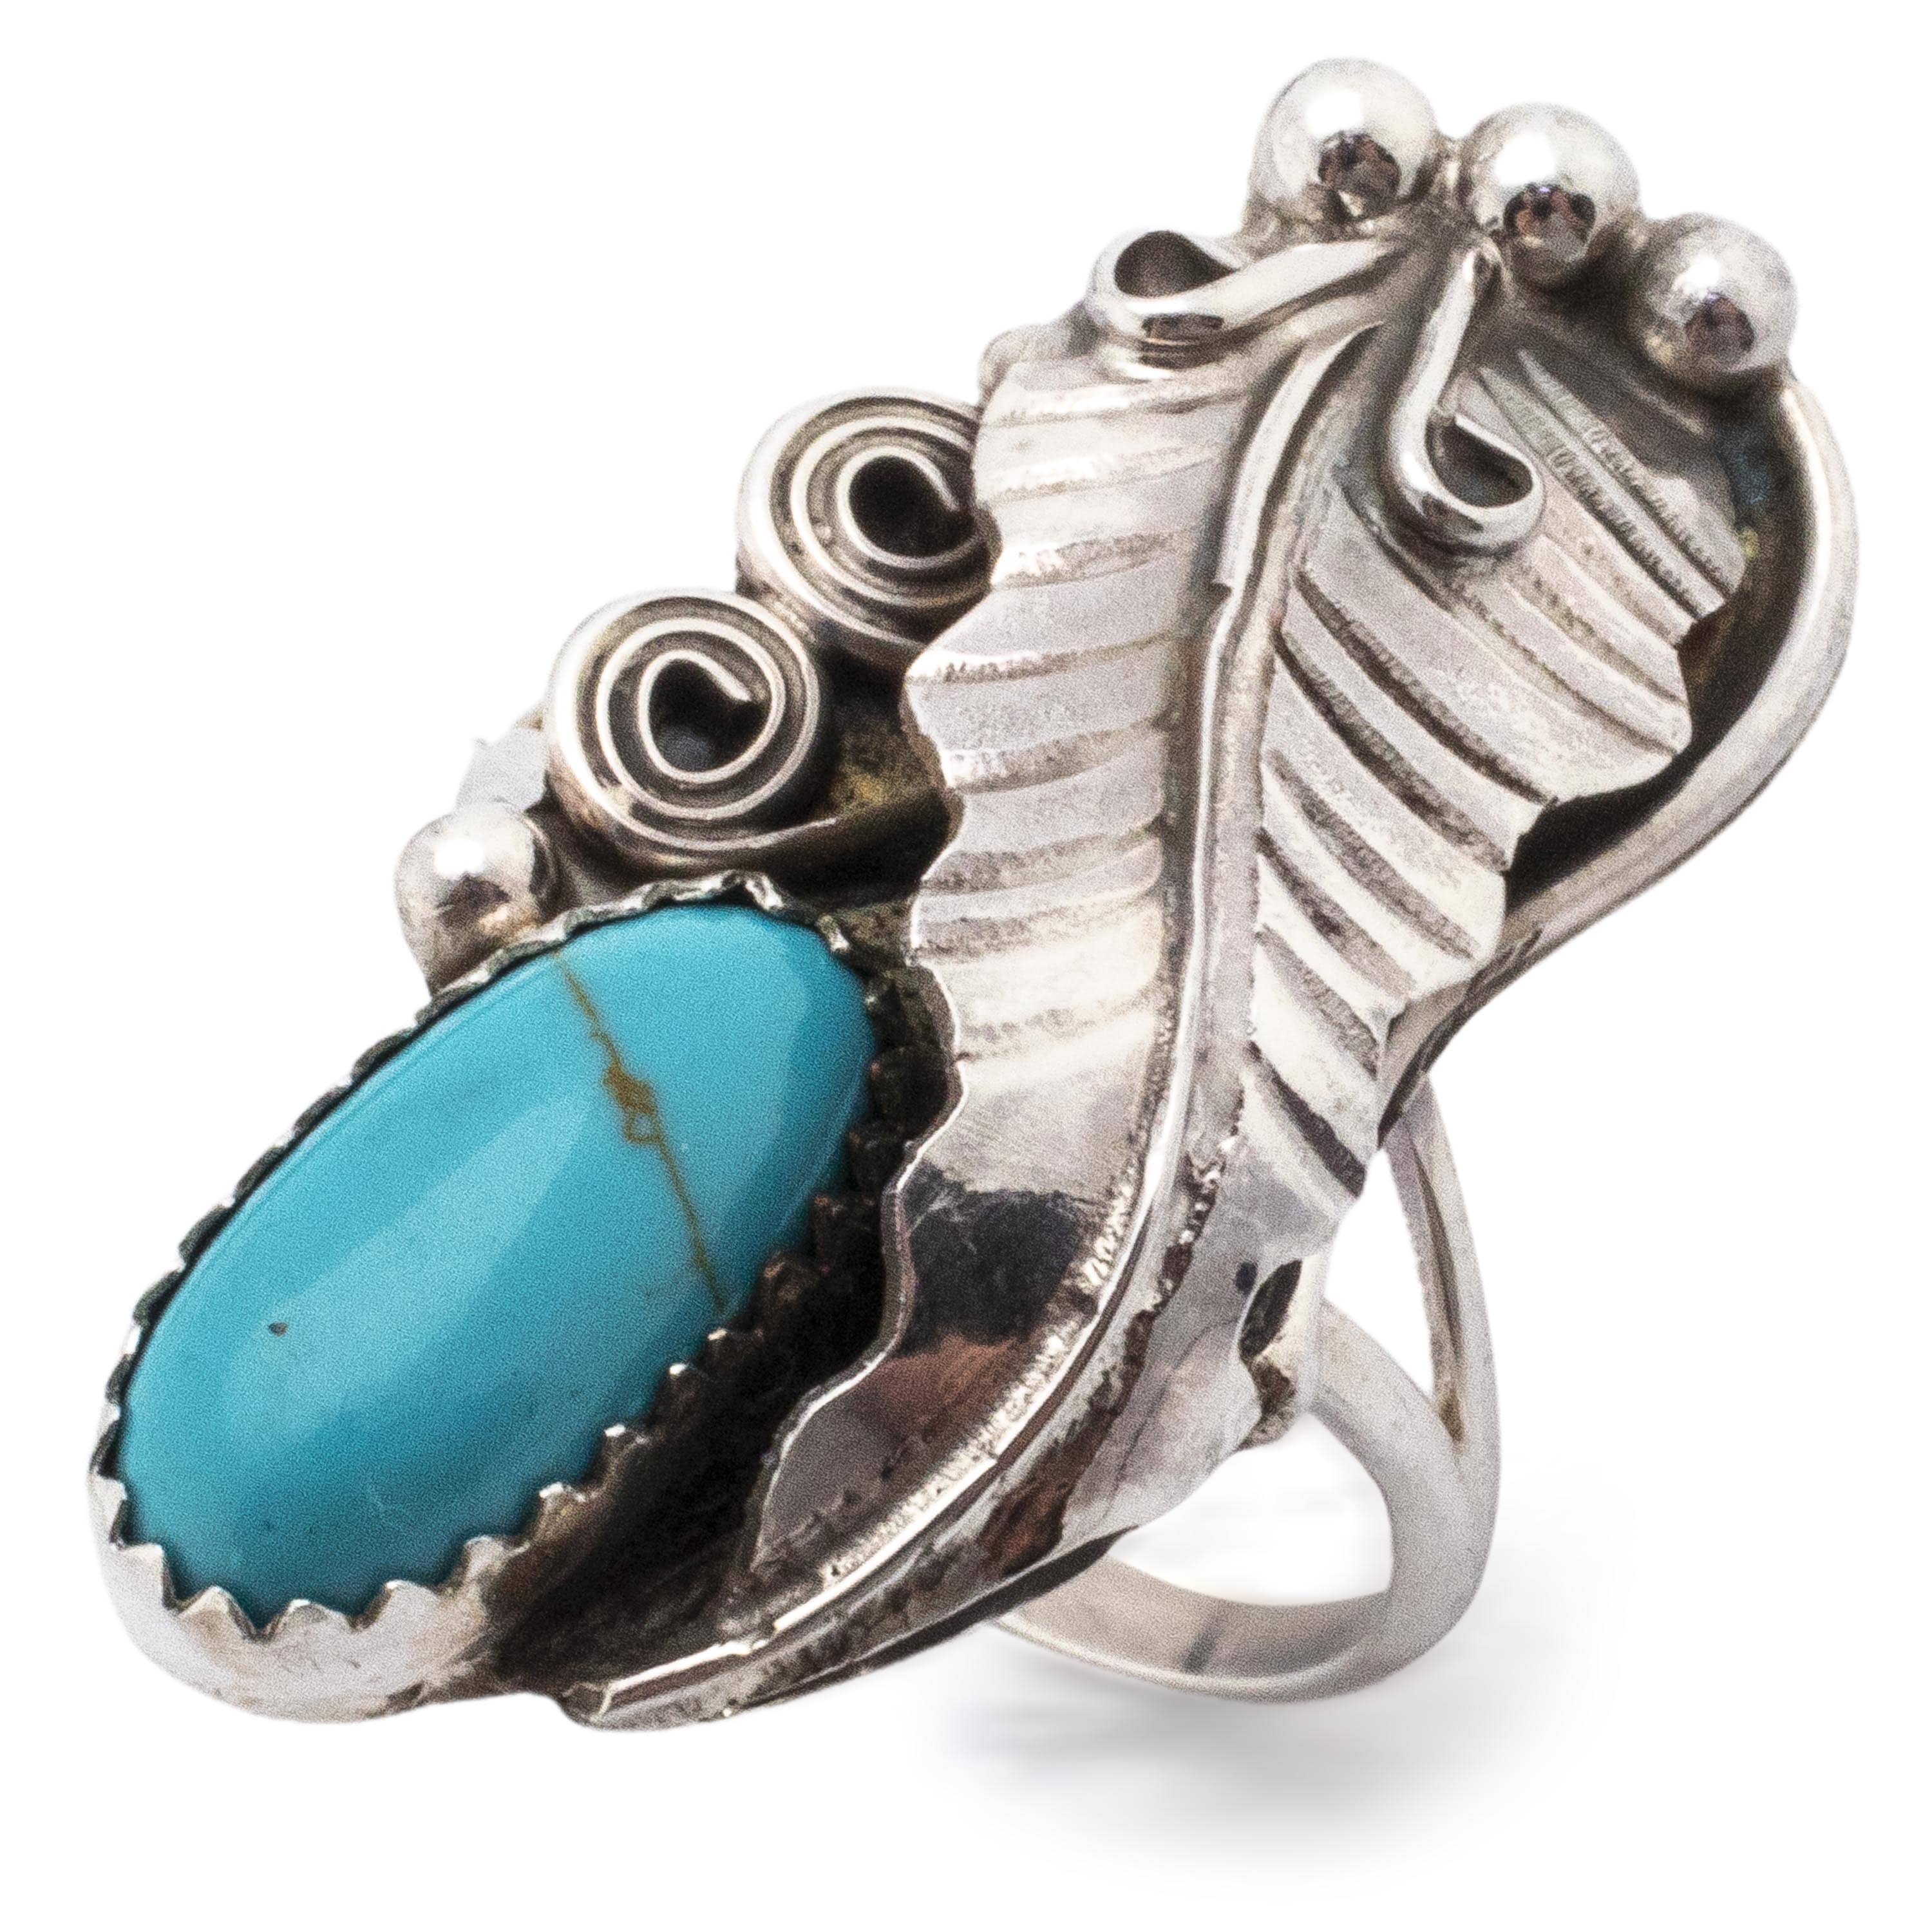 Kalifano Native American Jewelry Ronnie Martinez Navajo Turquoise with Feather USA Native American Made 925 Sterling Silver Ring